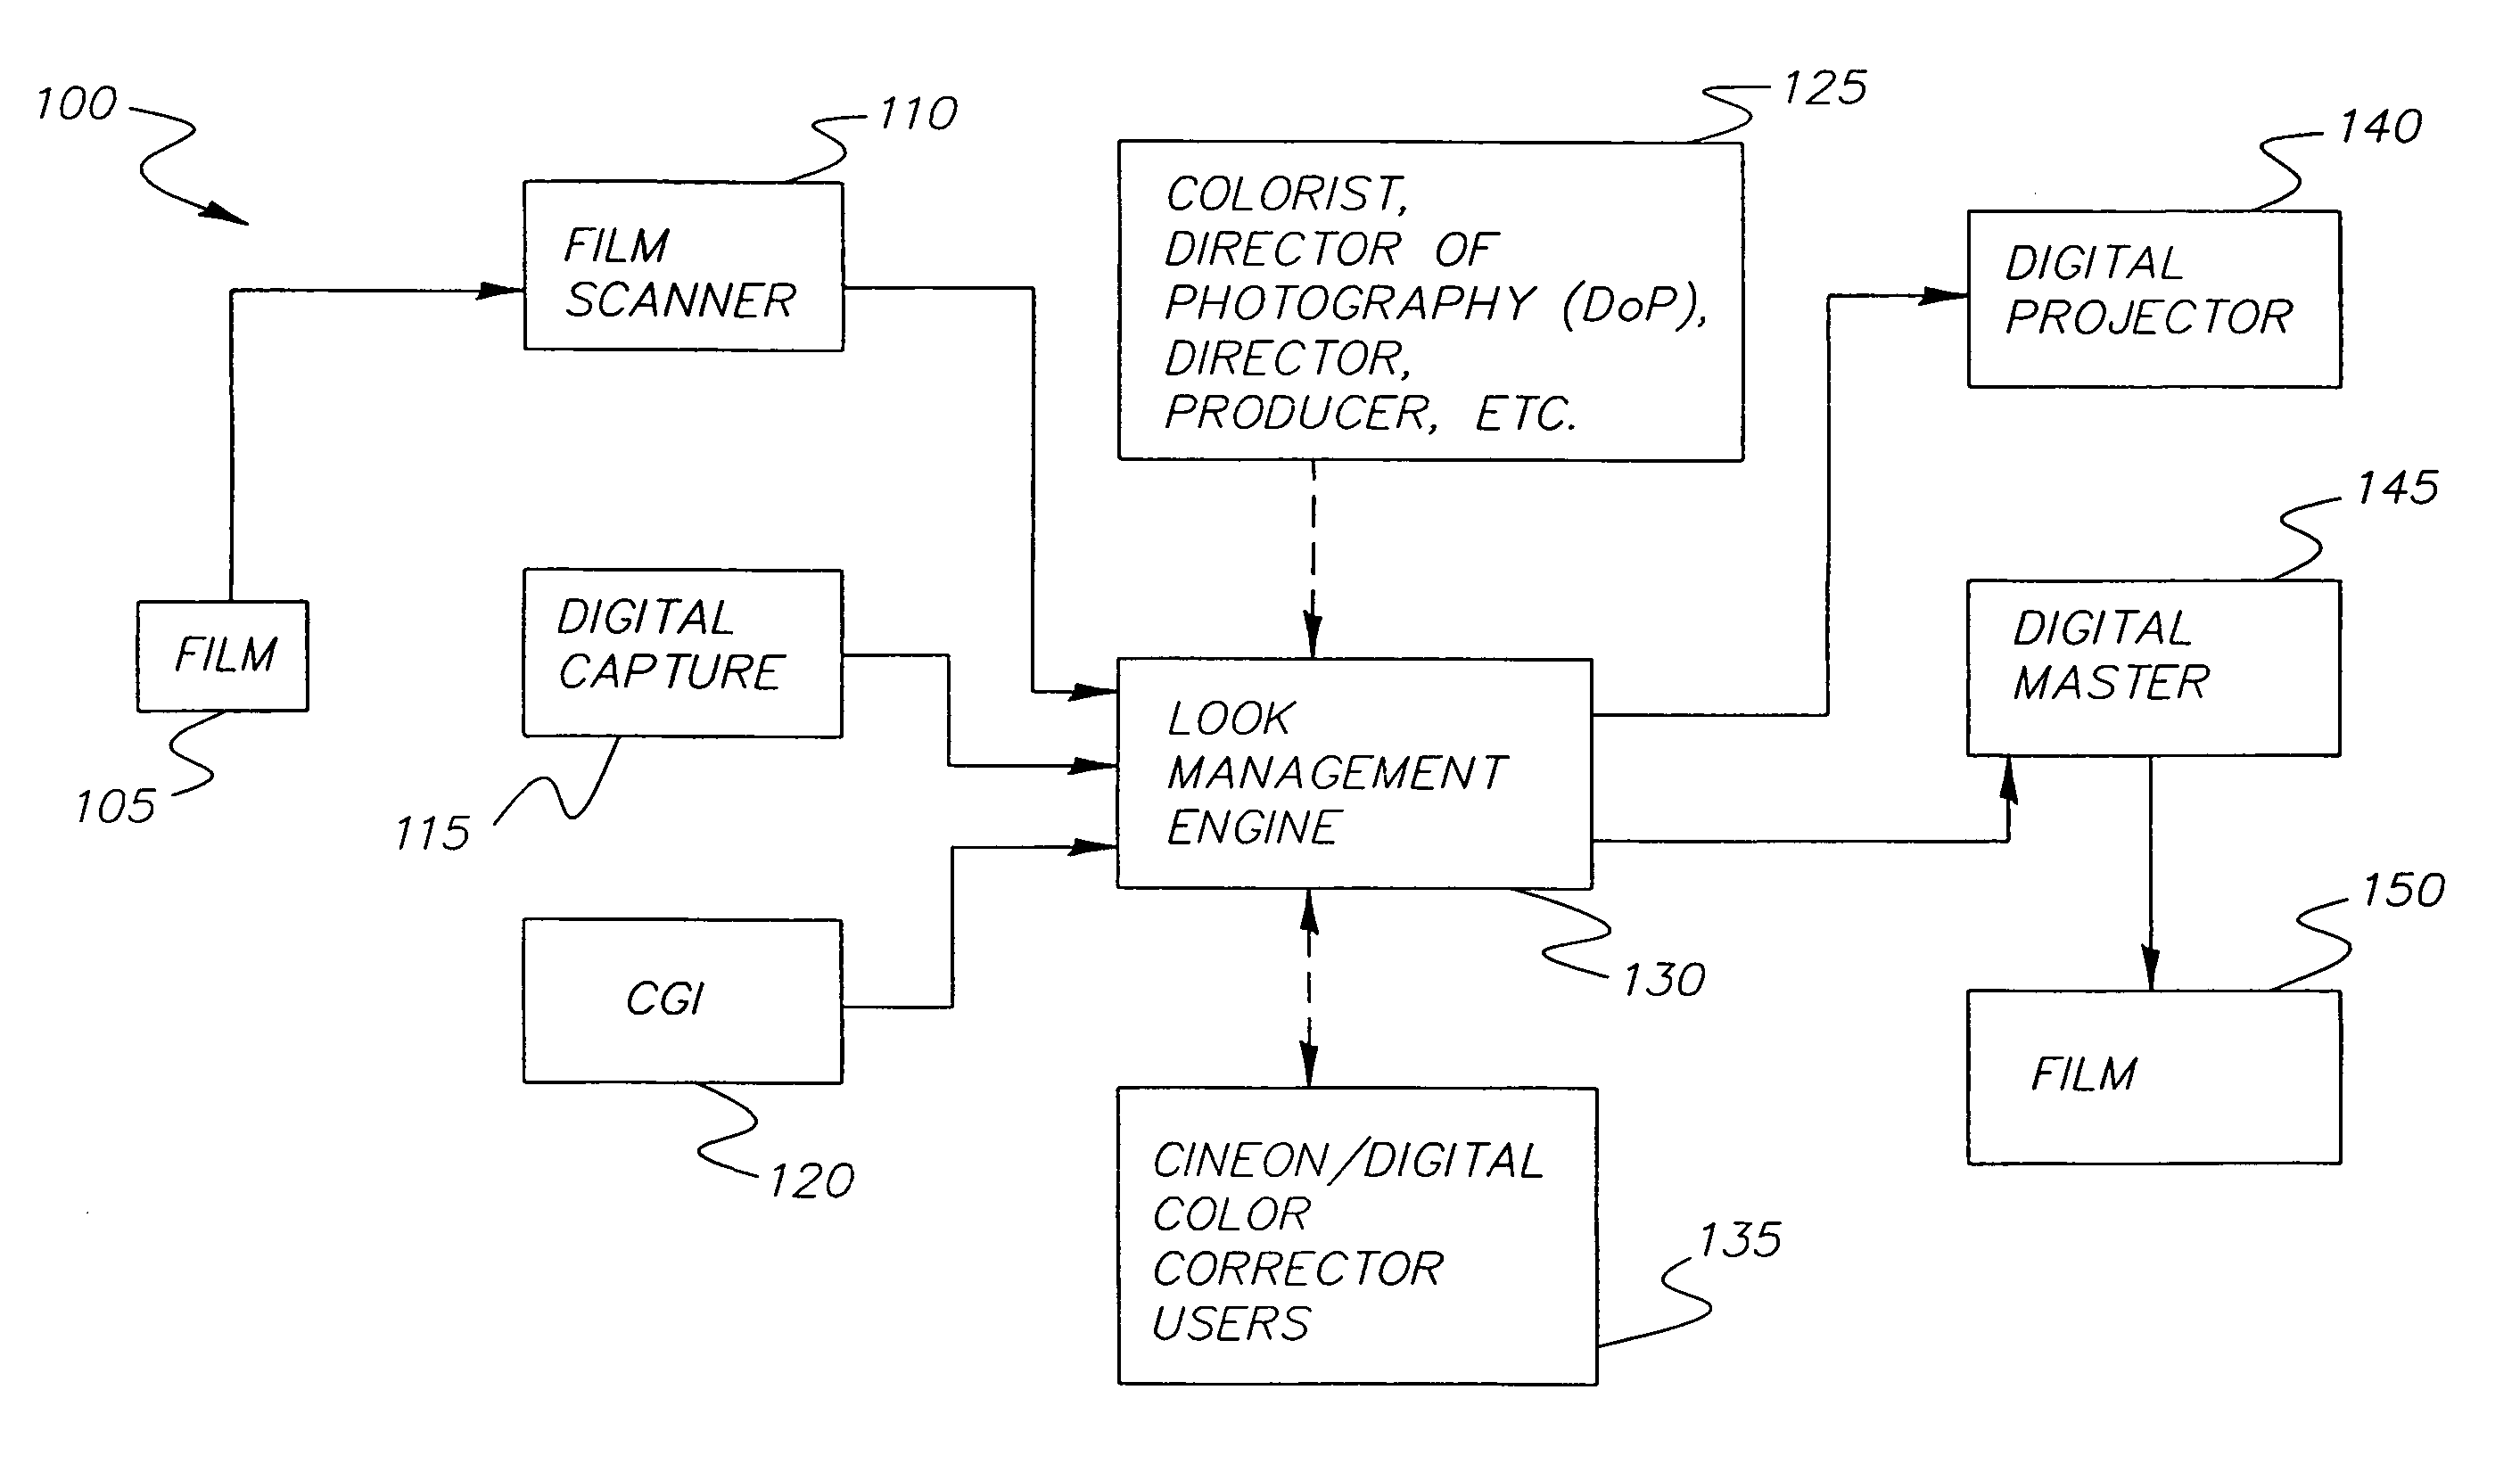 Method and system for preserving the creative intent within a motion picture production chain